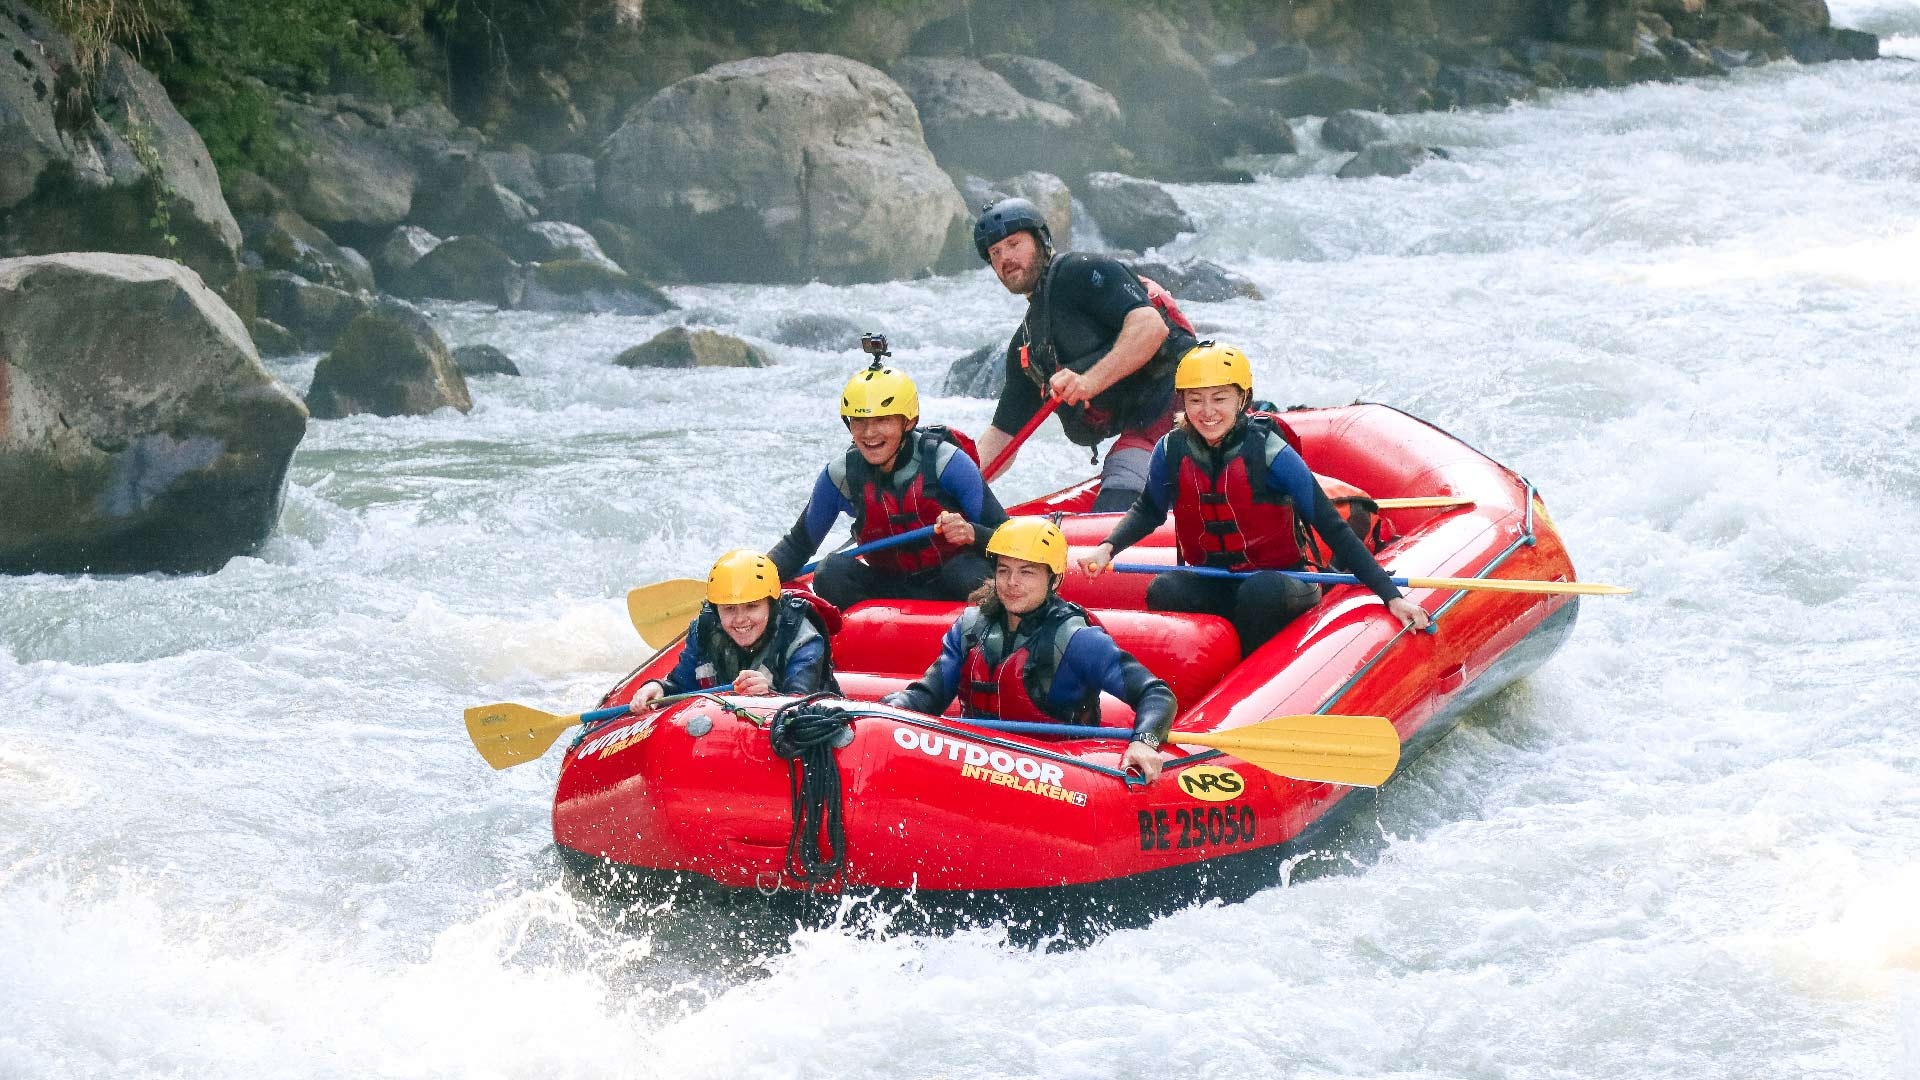 Rafting: Whitewater boating on an intense river full of powerful rapids. 1920x1080 Full HD Background.